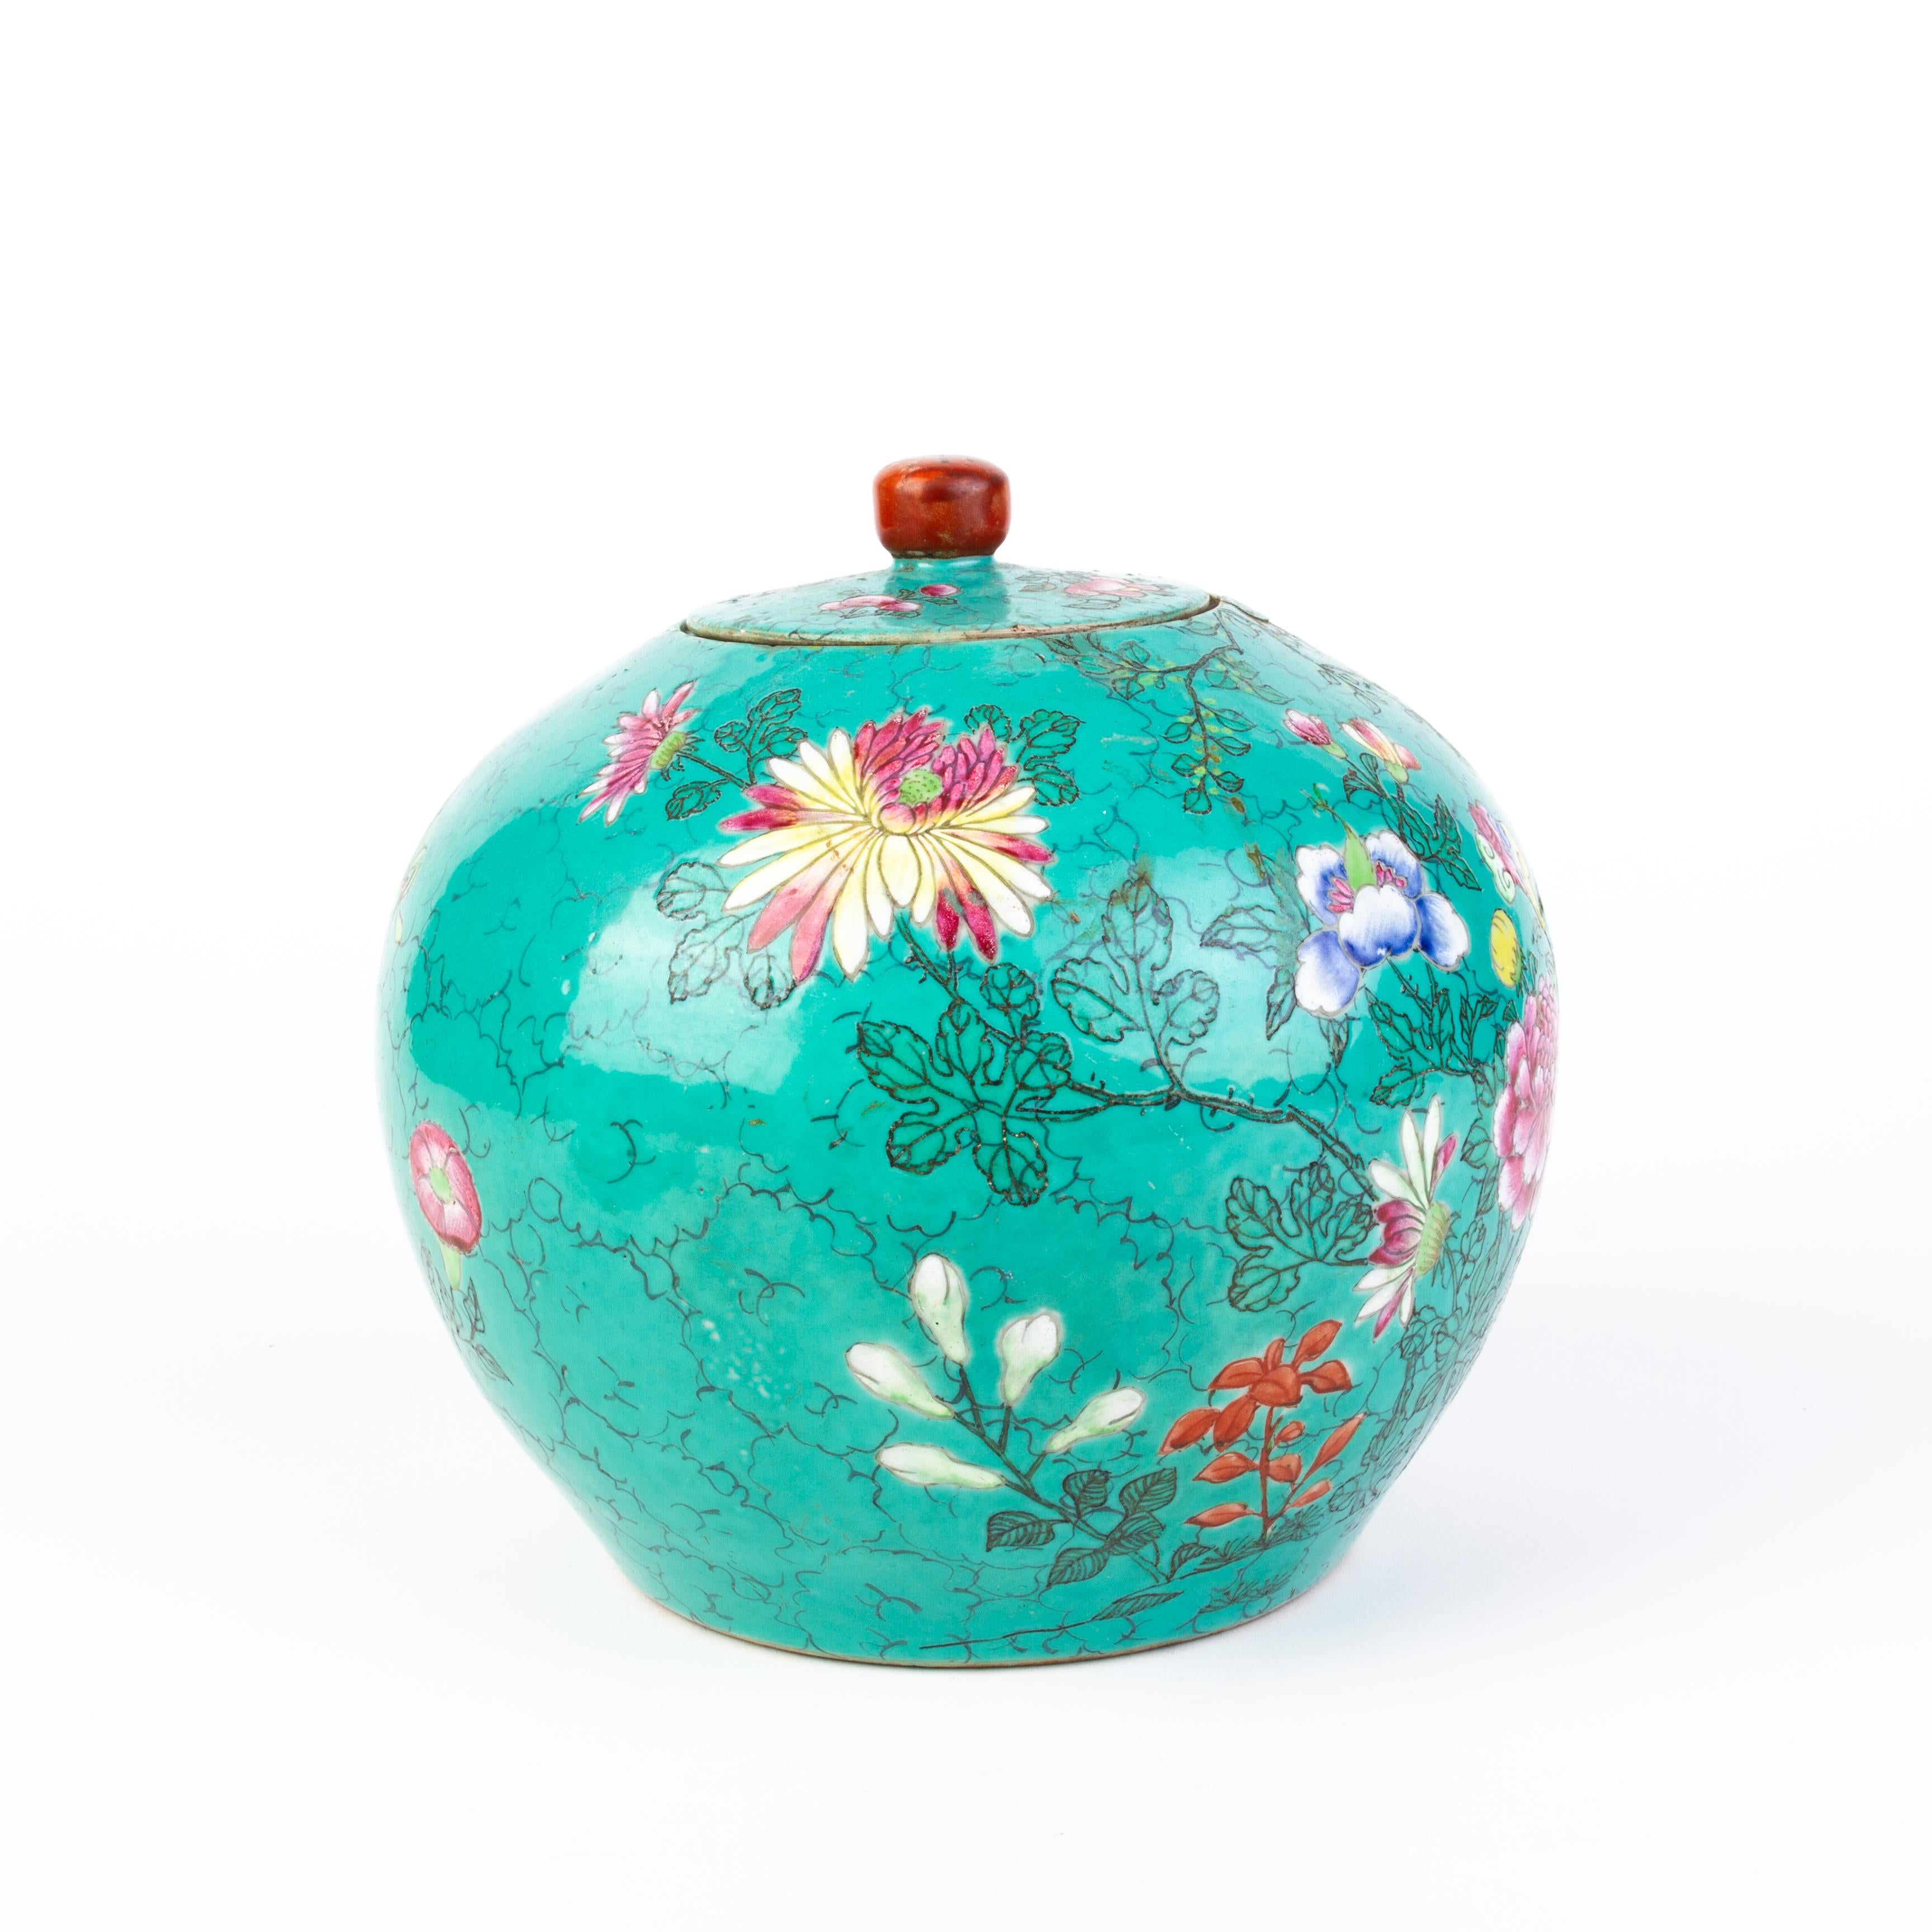 Chinese famille rose ginger jar, decorated with lush blossoms.
From a private collection.
Free international shipping. 